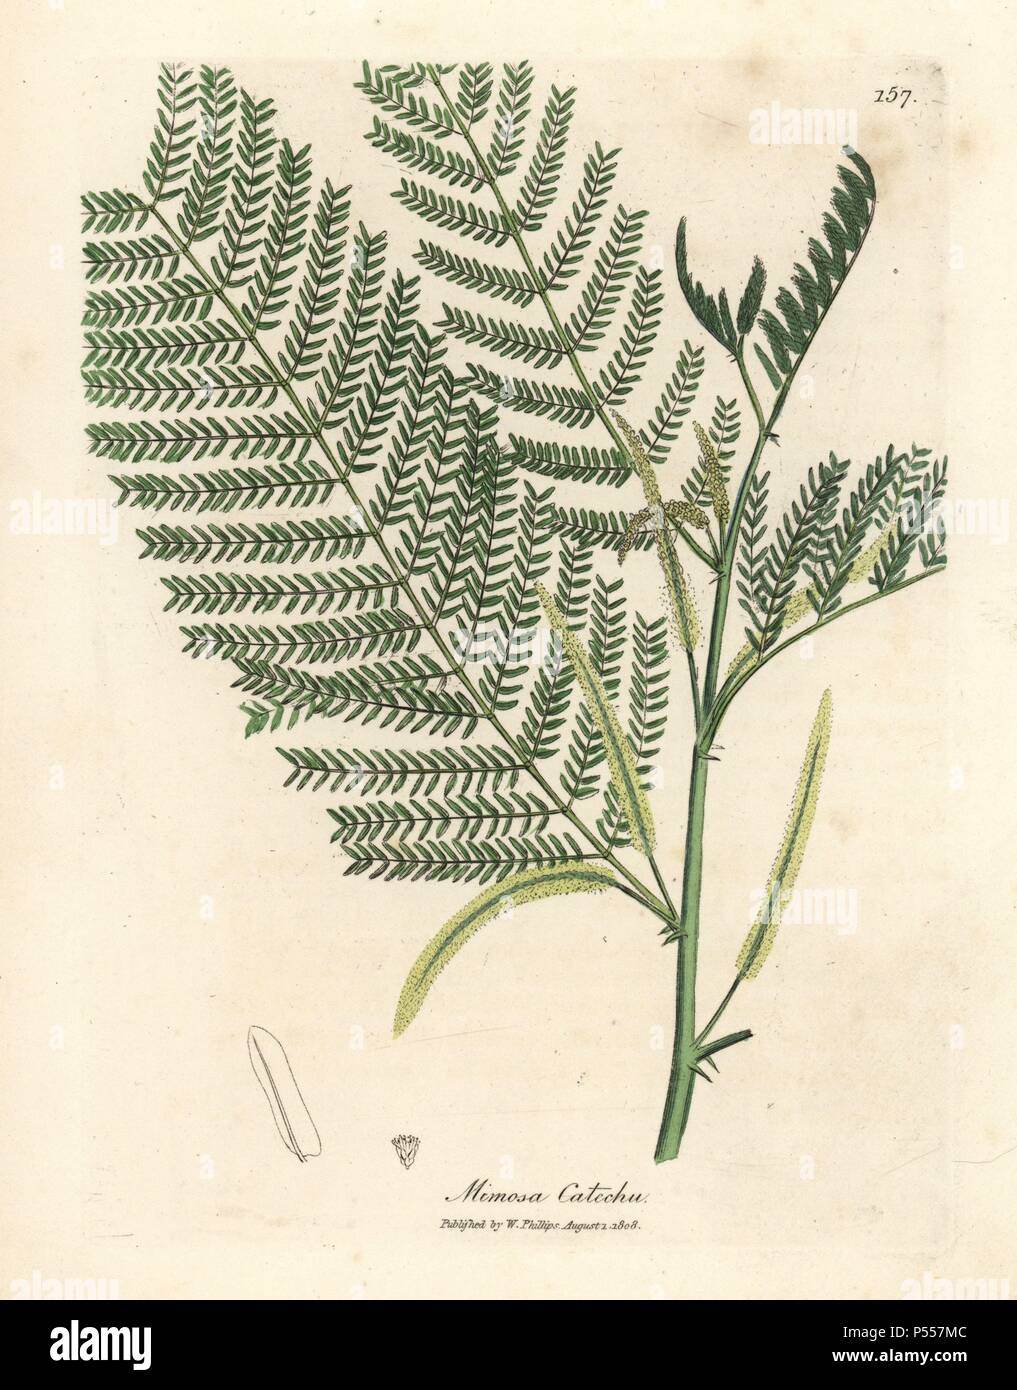 Catechu, Acacia catechu. Handcoloured copperplate engraving from a botanical illustration by James Sowerby from William Woodville and Sir William Jackson Hooker's 'Medical Botany,' John Bohn, London, 1832. The tireless Sowerby (1757-1822) drew over 2, 500 plants for Smith's mammoth 'English Botany' (1790-1814) and 440 mushrooms for 'Coloured Figures of English Fungi ' (1797) among many other works. Stock Photo